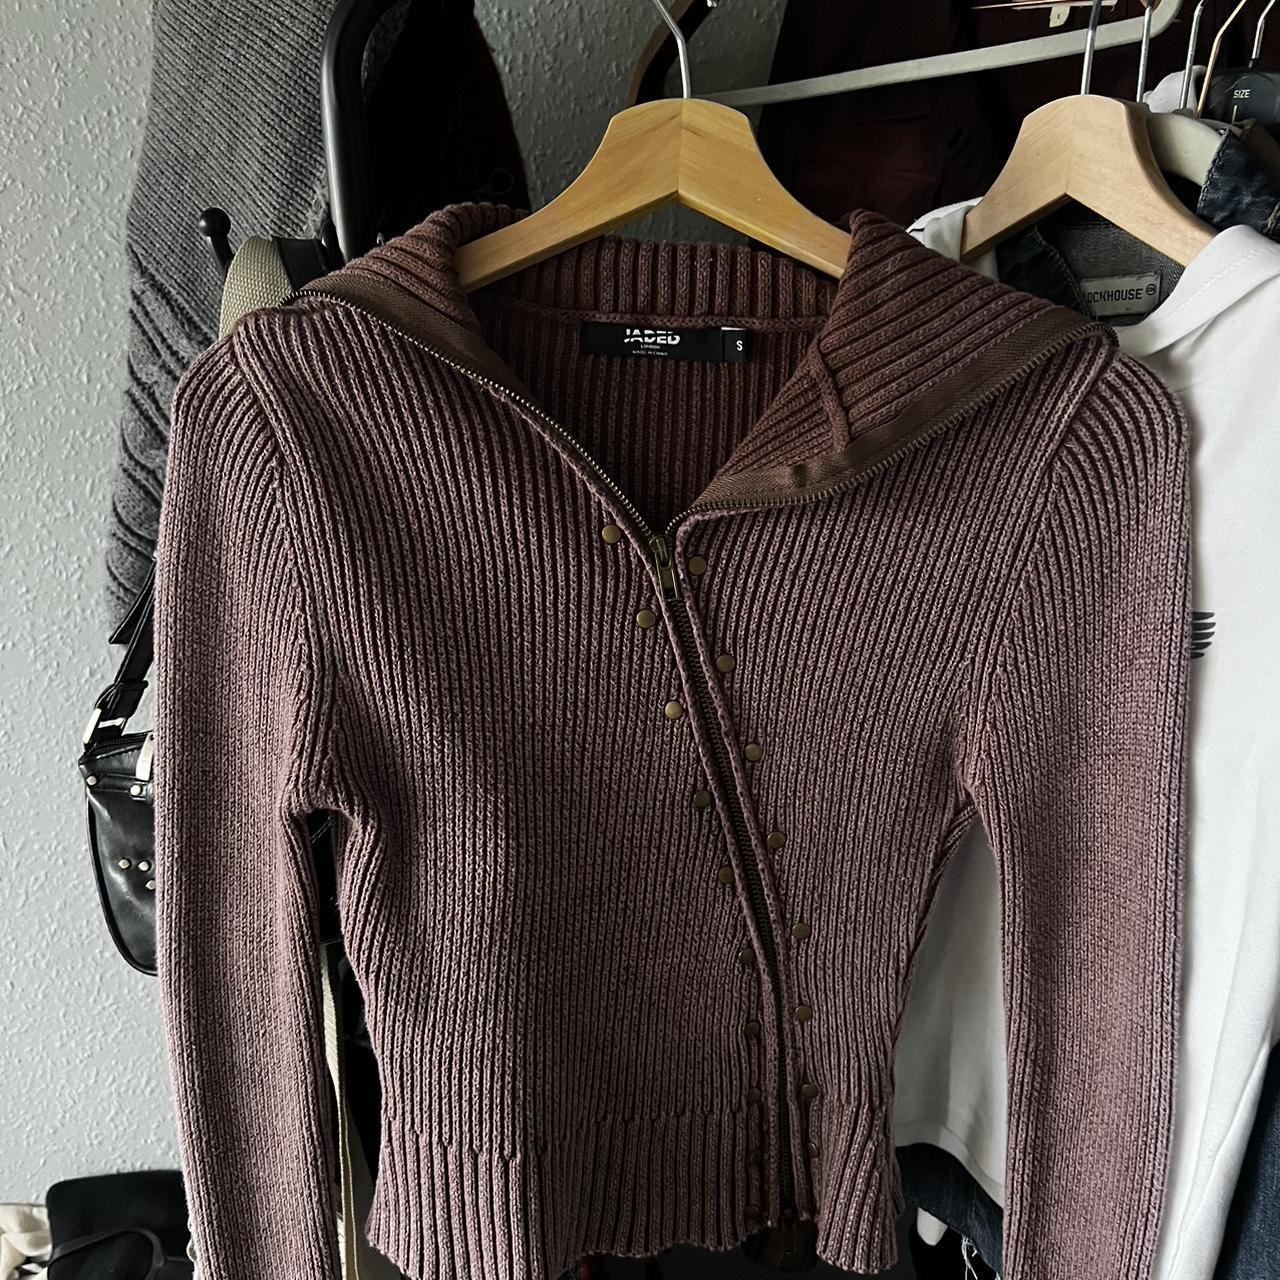 jaded london ribbed knit zip up top fits 6-8 - Depop